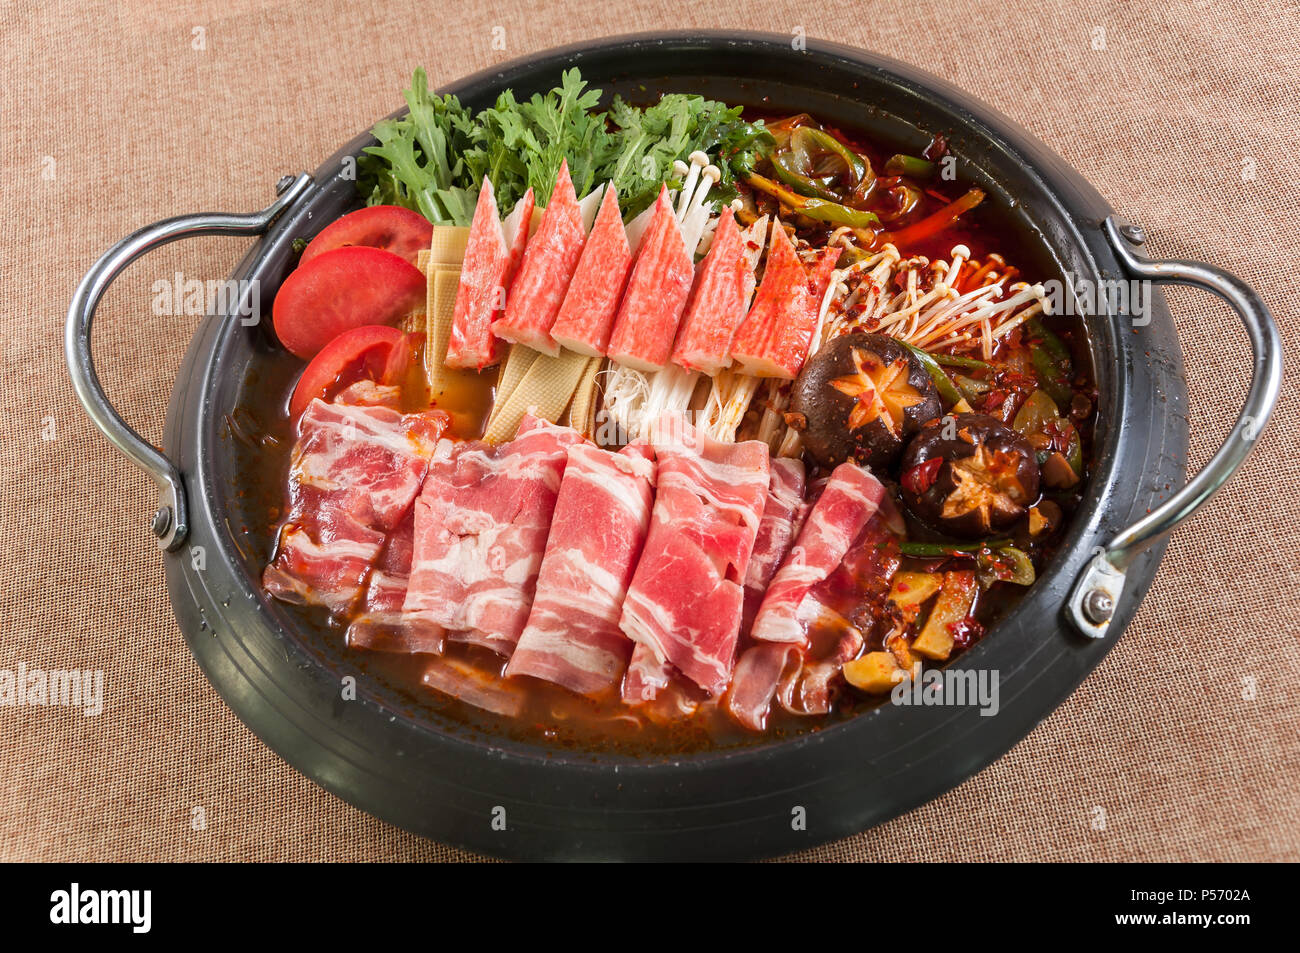 98,840 Boiling Hot Pot Royalty-Free Images, Stock Photos